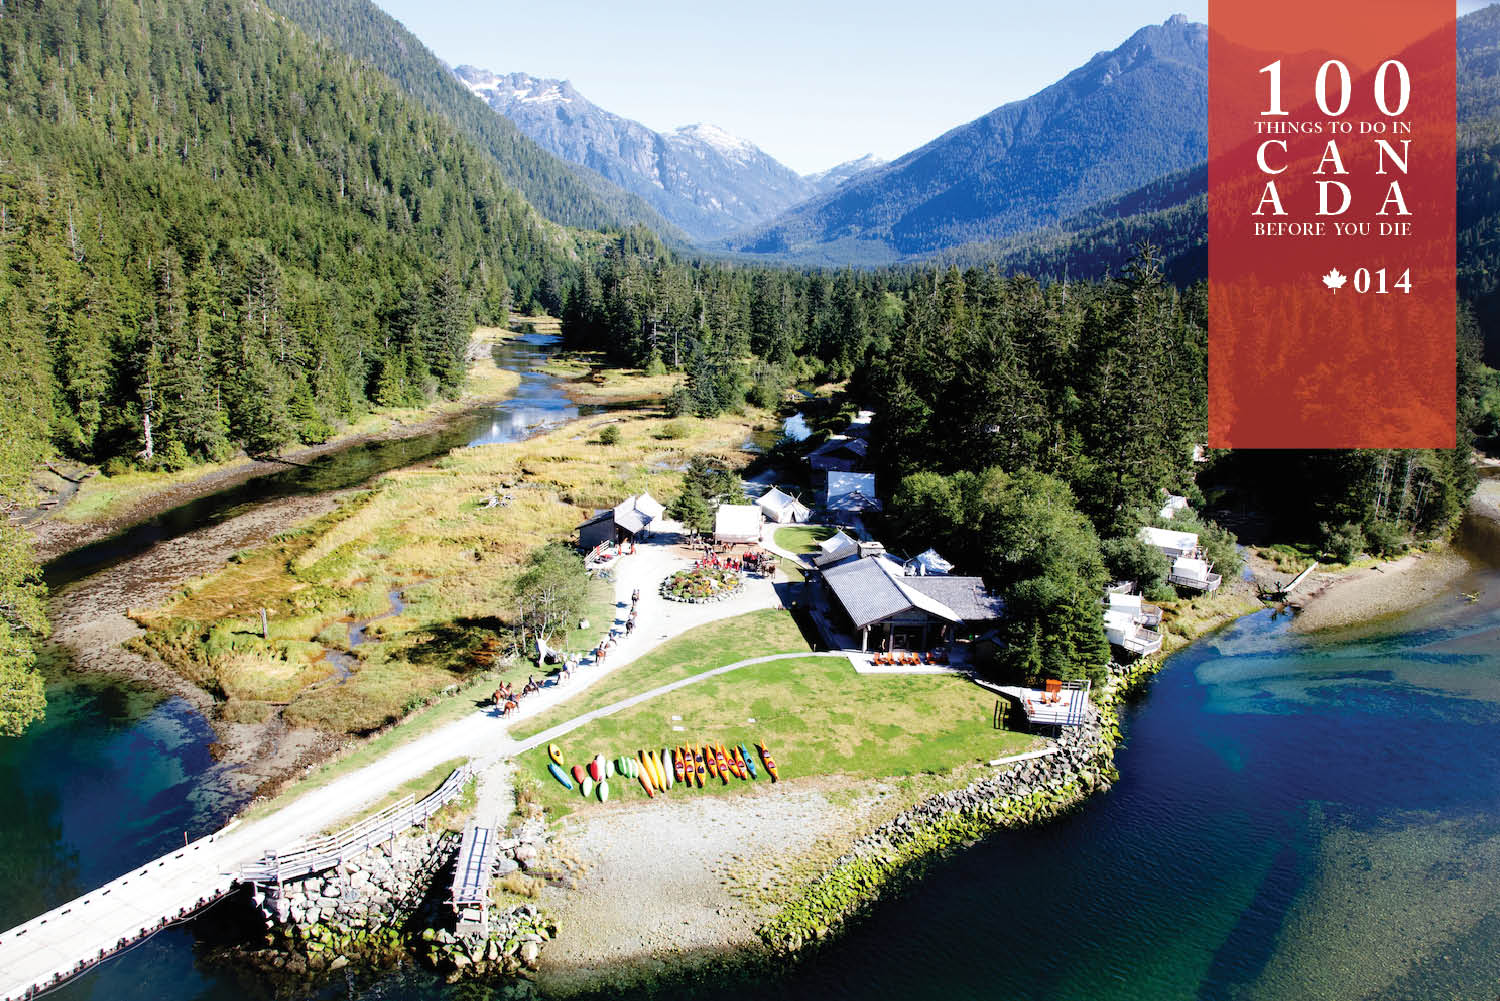 Find rustic royalty at Clayoquot Wilderness Resort